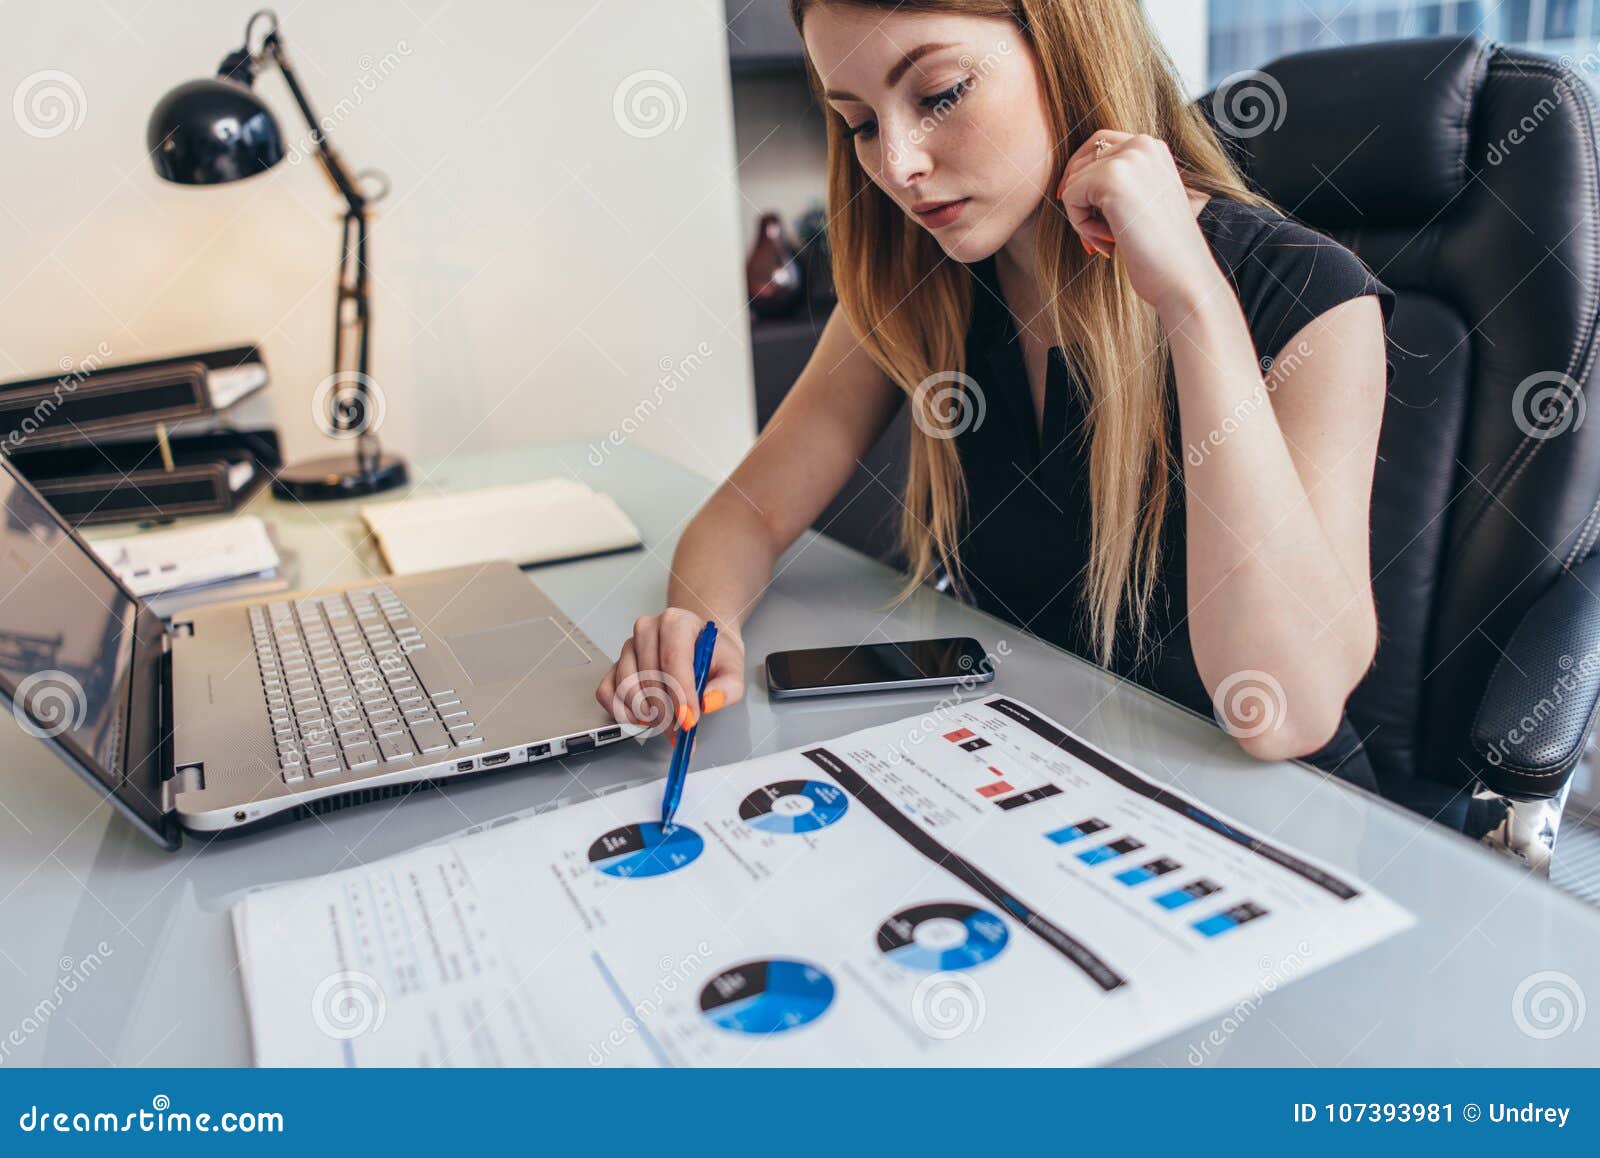 female businesswoman readind financial report analyzing statistics pointing at pie chart working at her desk